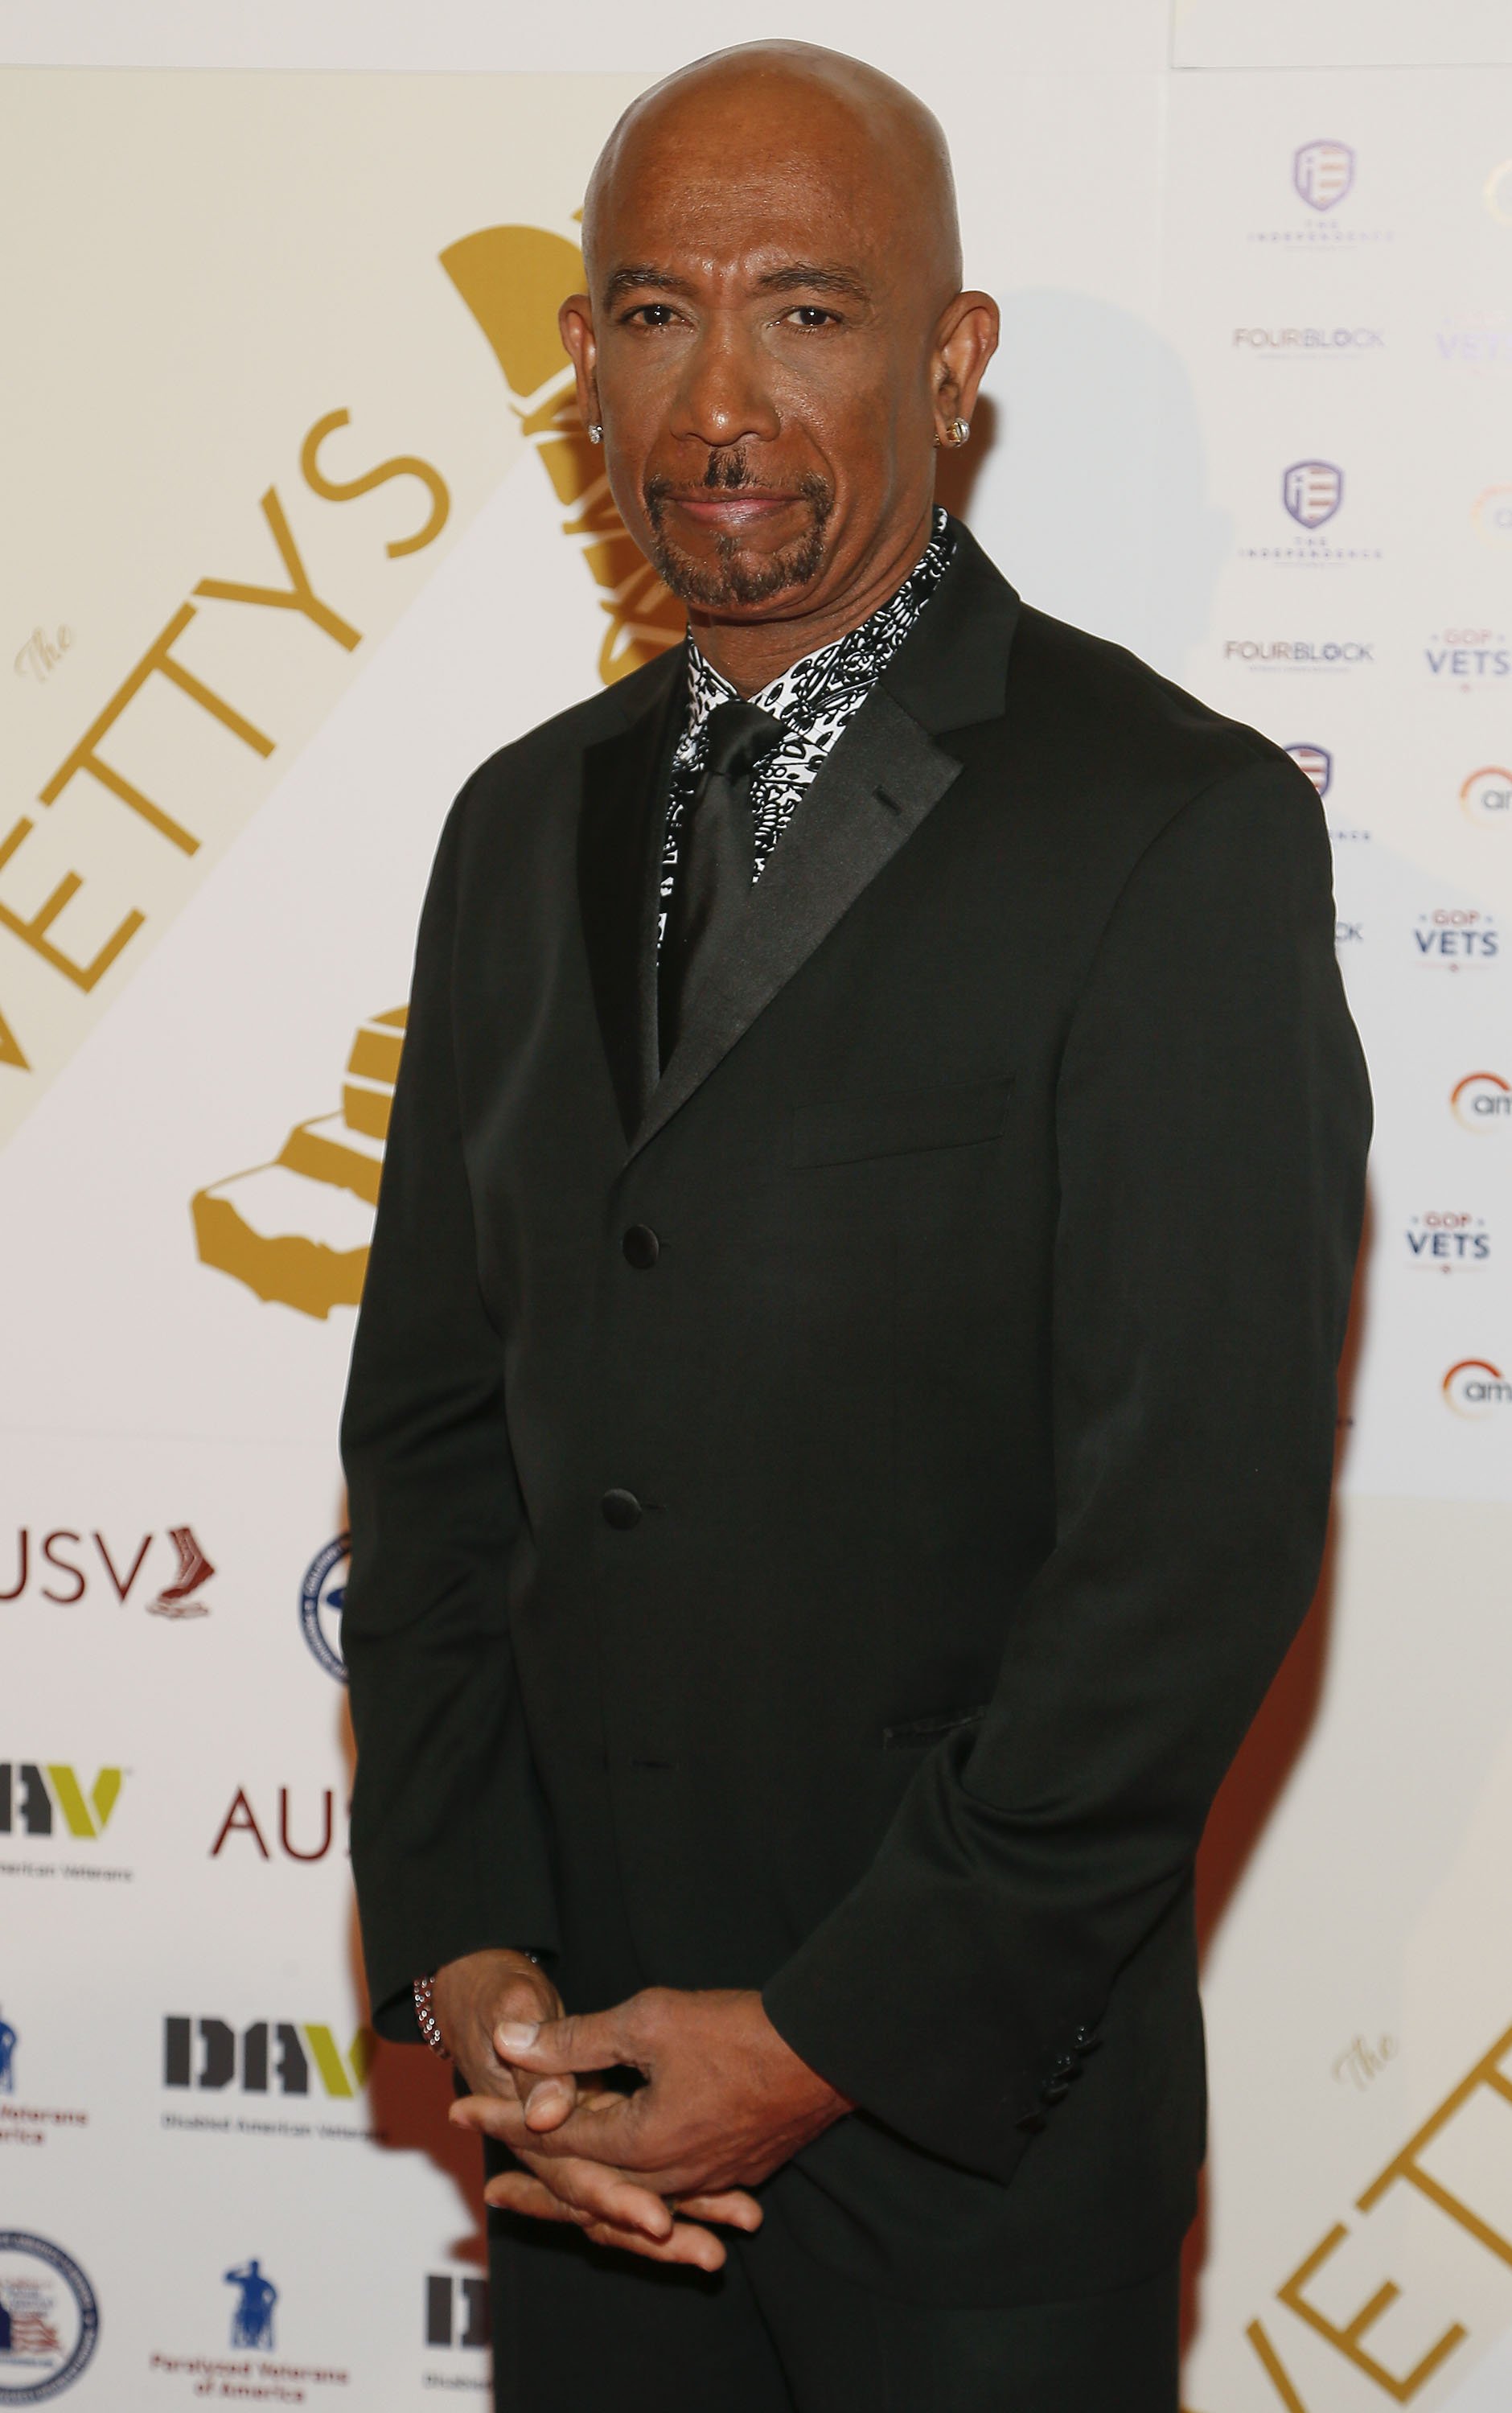 Montel Williams at the 3rd Annual Vetty Awards on Jan. 20, 2018 in Washington, DC. |Photo: Getty Images